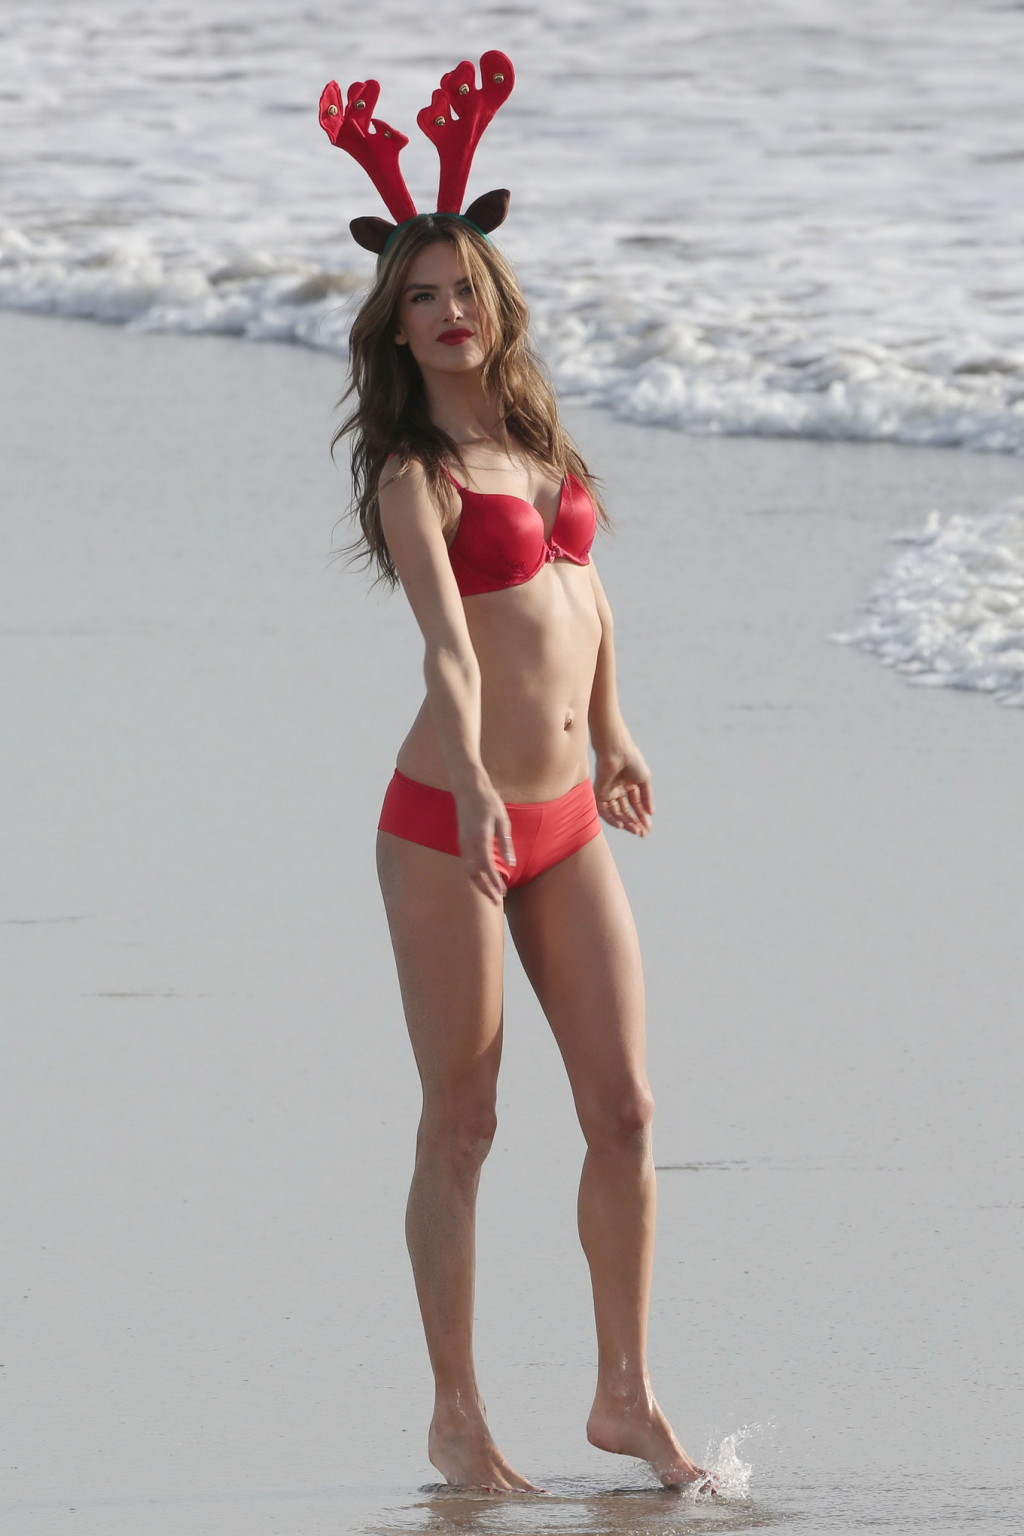 Alessandra Ambrosio wearing skimpy red two piece at Victoria's Secret photoshoot #75209934